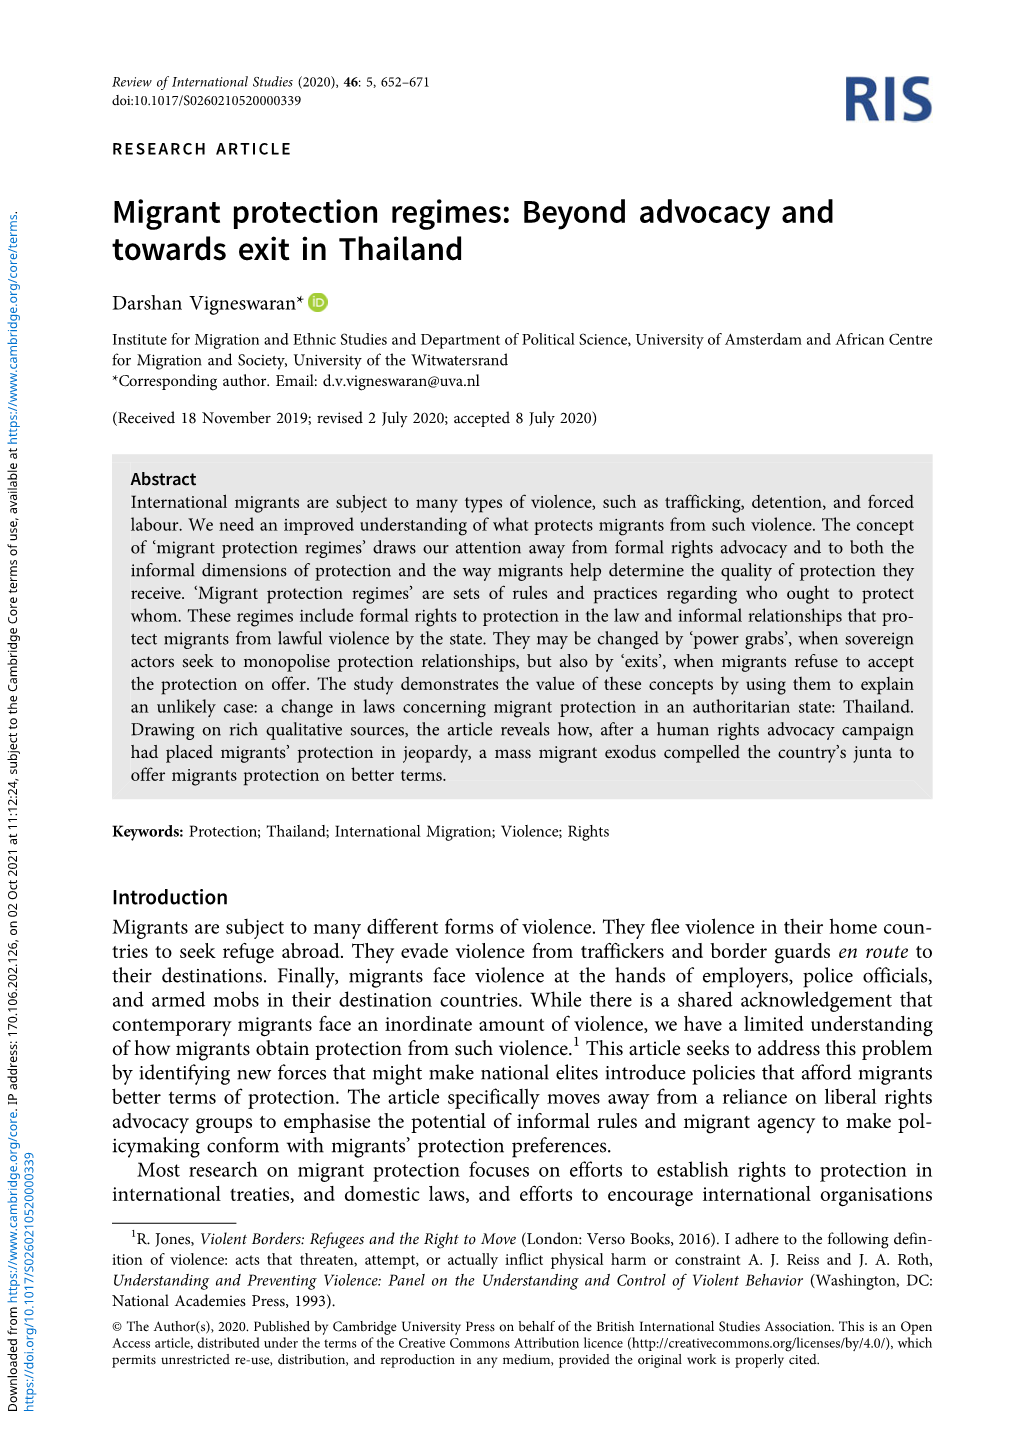 Migrant Protection Regimes: Beyond Advocacy and Towards Exit in Thailand